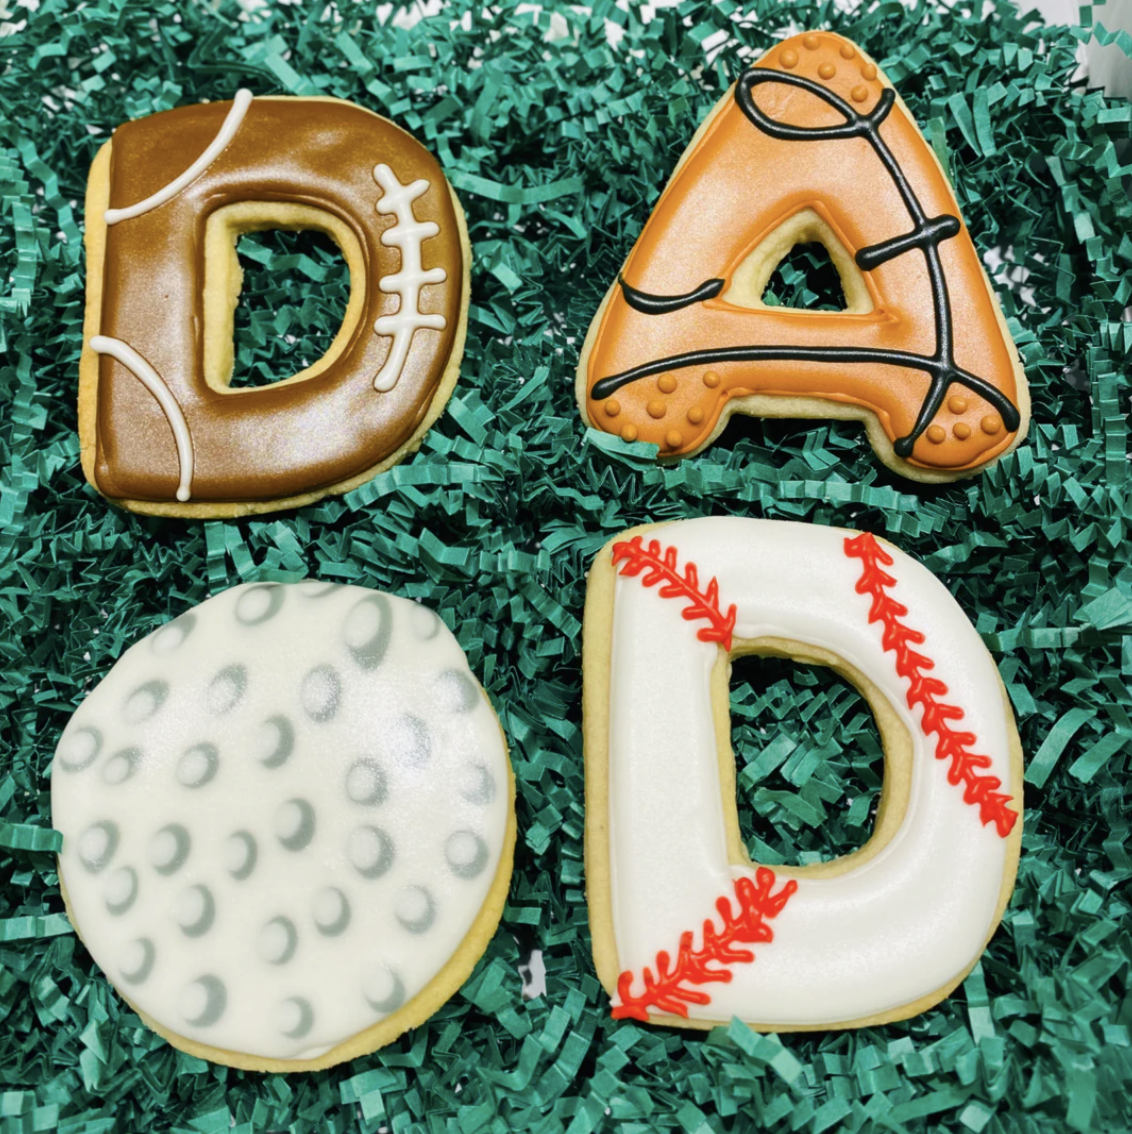 cookies that have football, baseball, and basketball designs on them that spell out the word dad